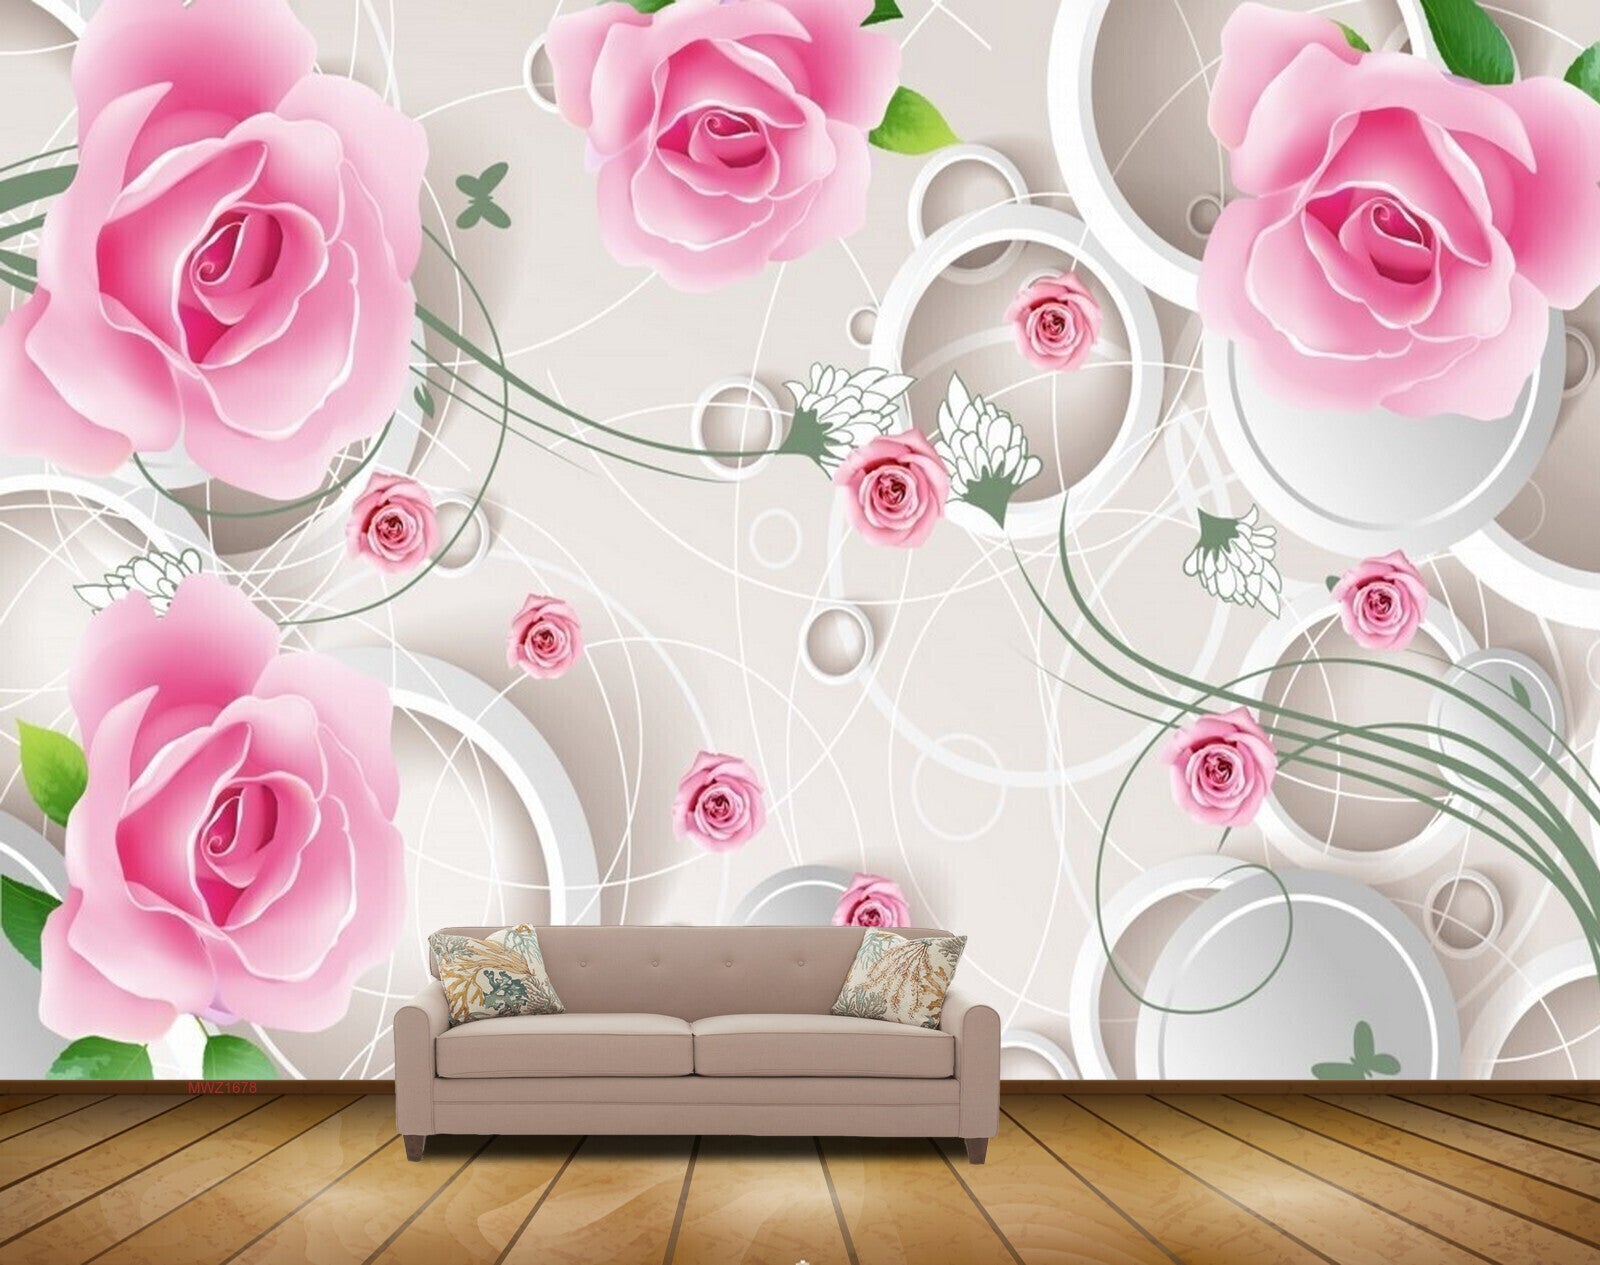 Pink Rose Flower Wallpaper 62 pictures